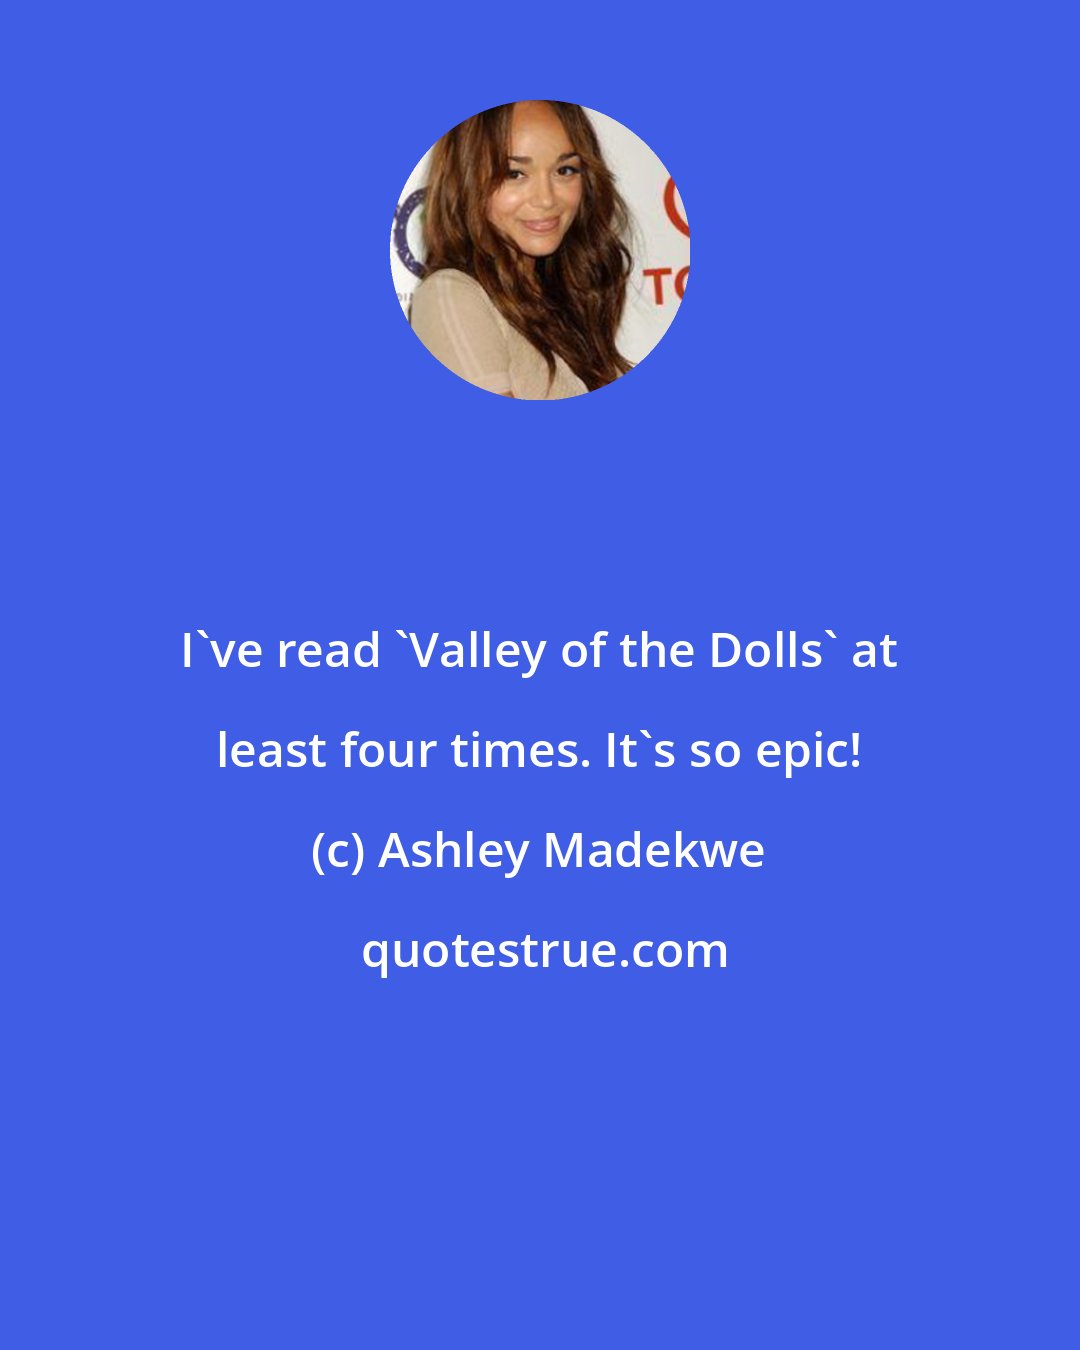 Ashley Madekwe: I've read 'Valley of the Dolls' at least four times. It's so epic!